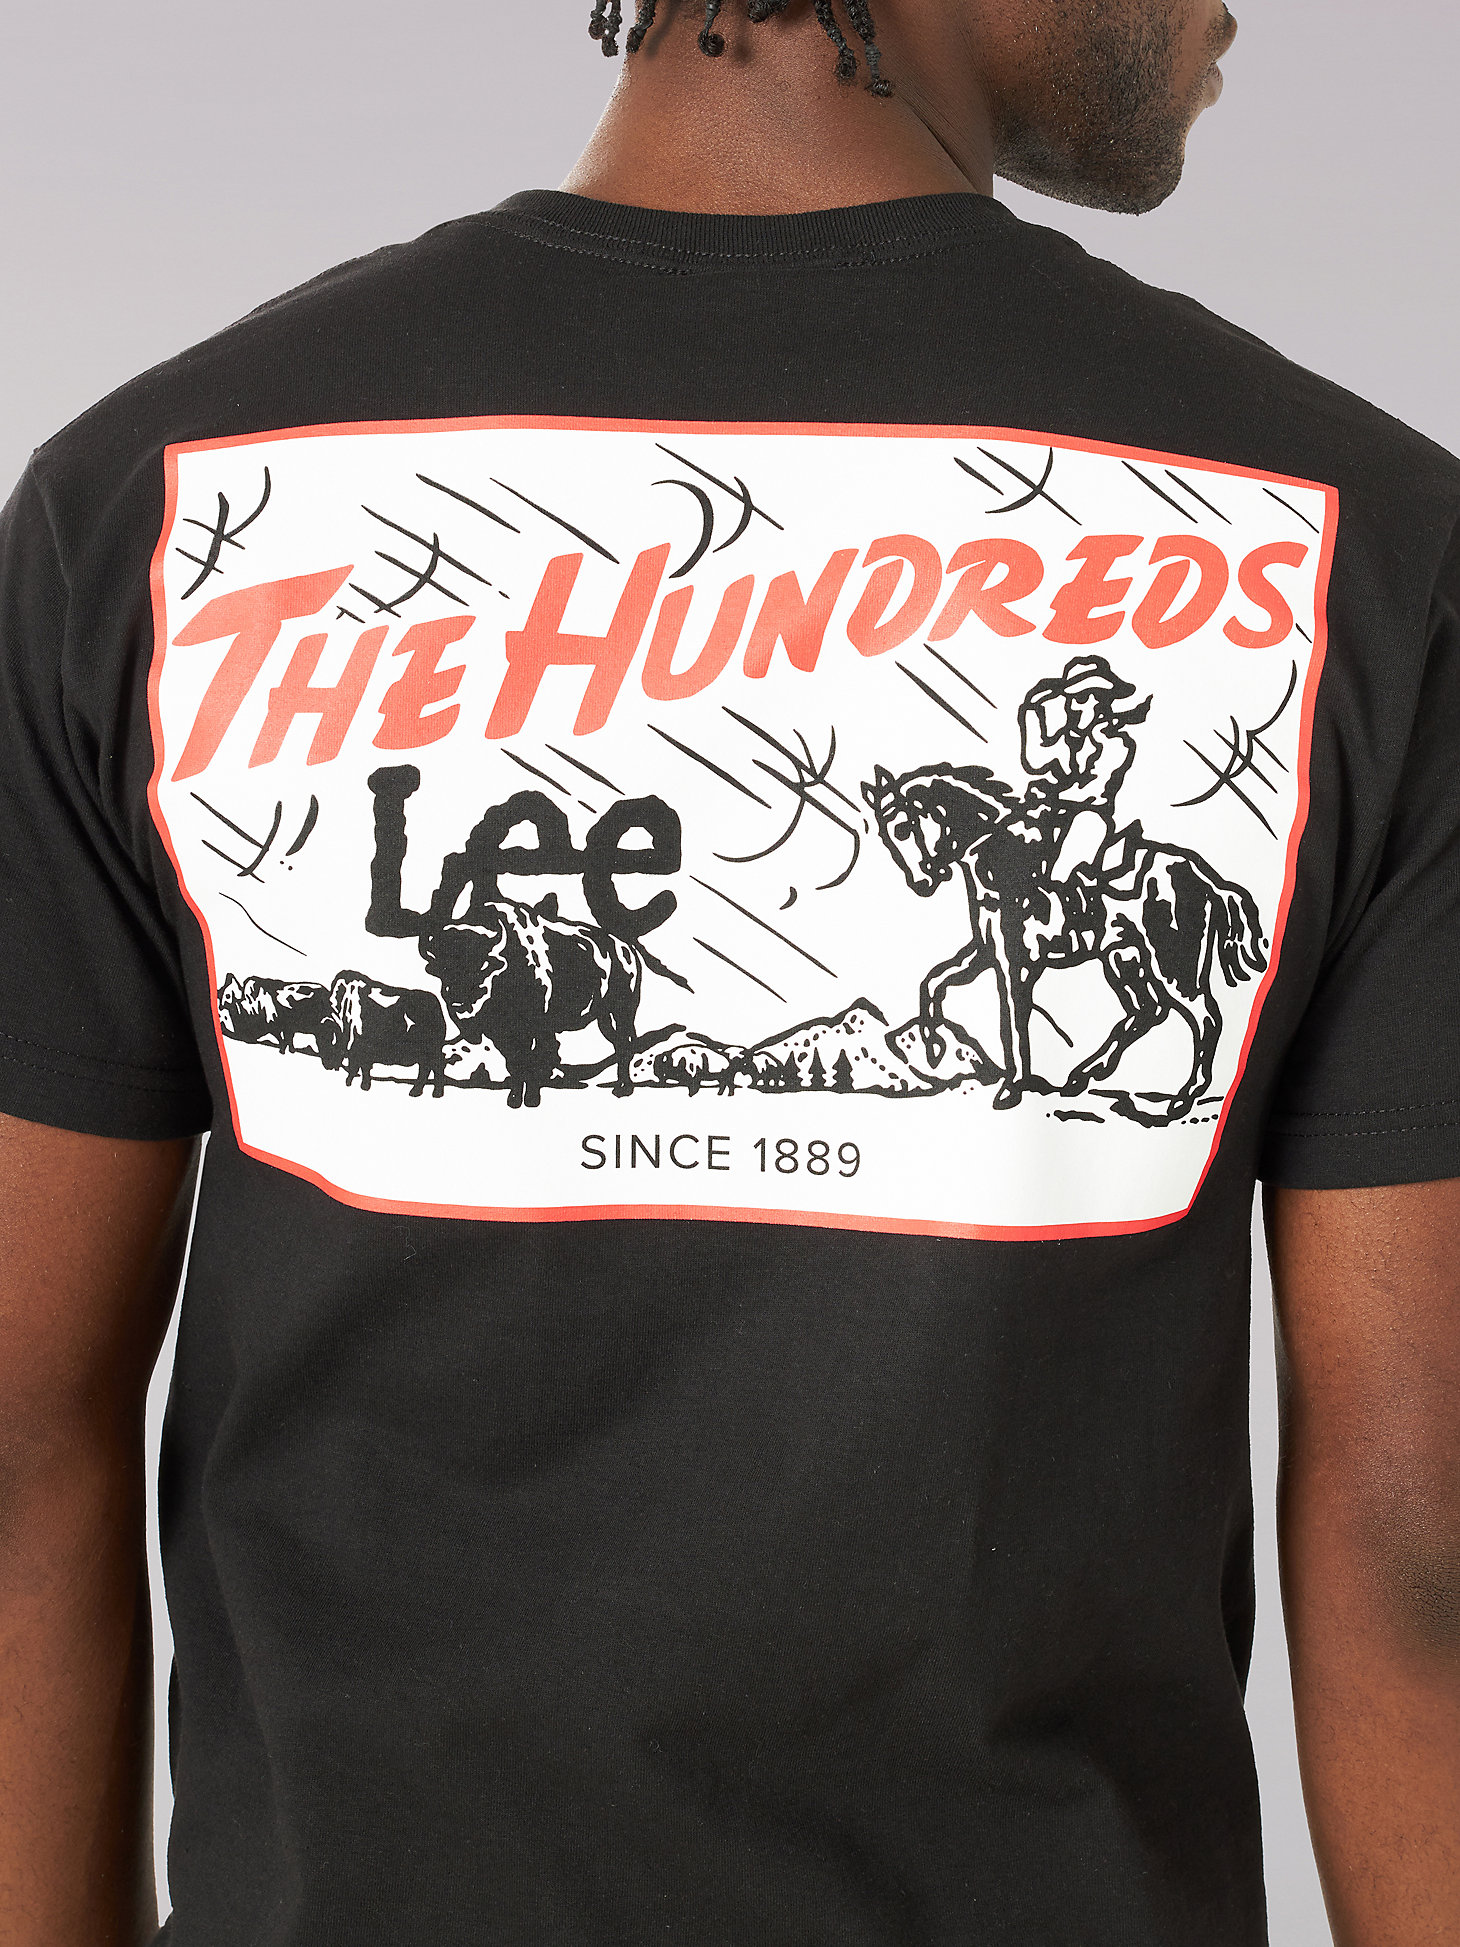 Men's Lee® x The Hundreds® Storm Rider Graphic Tee in Black alternative view 1